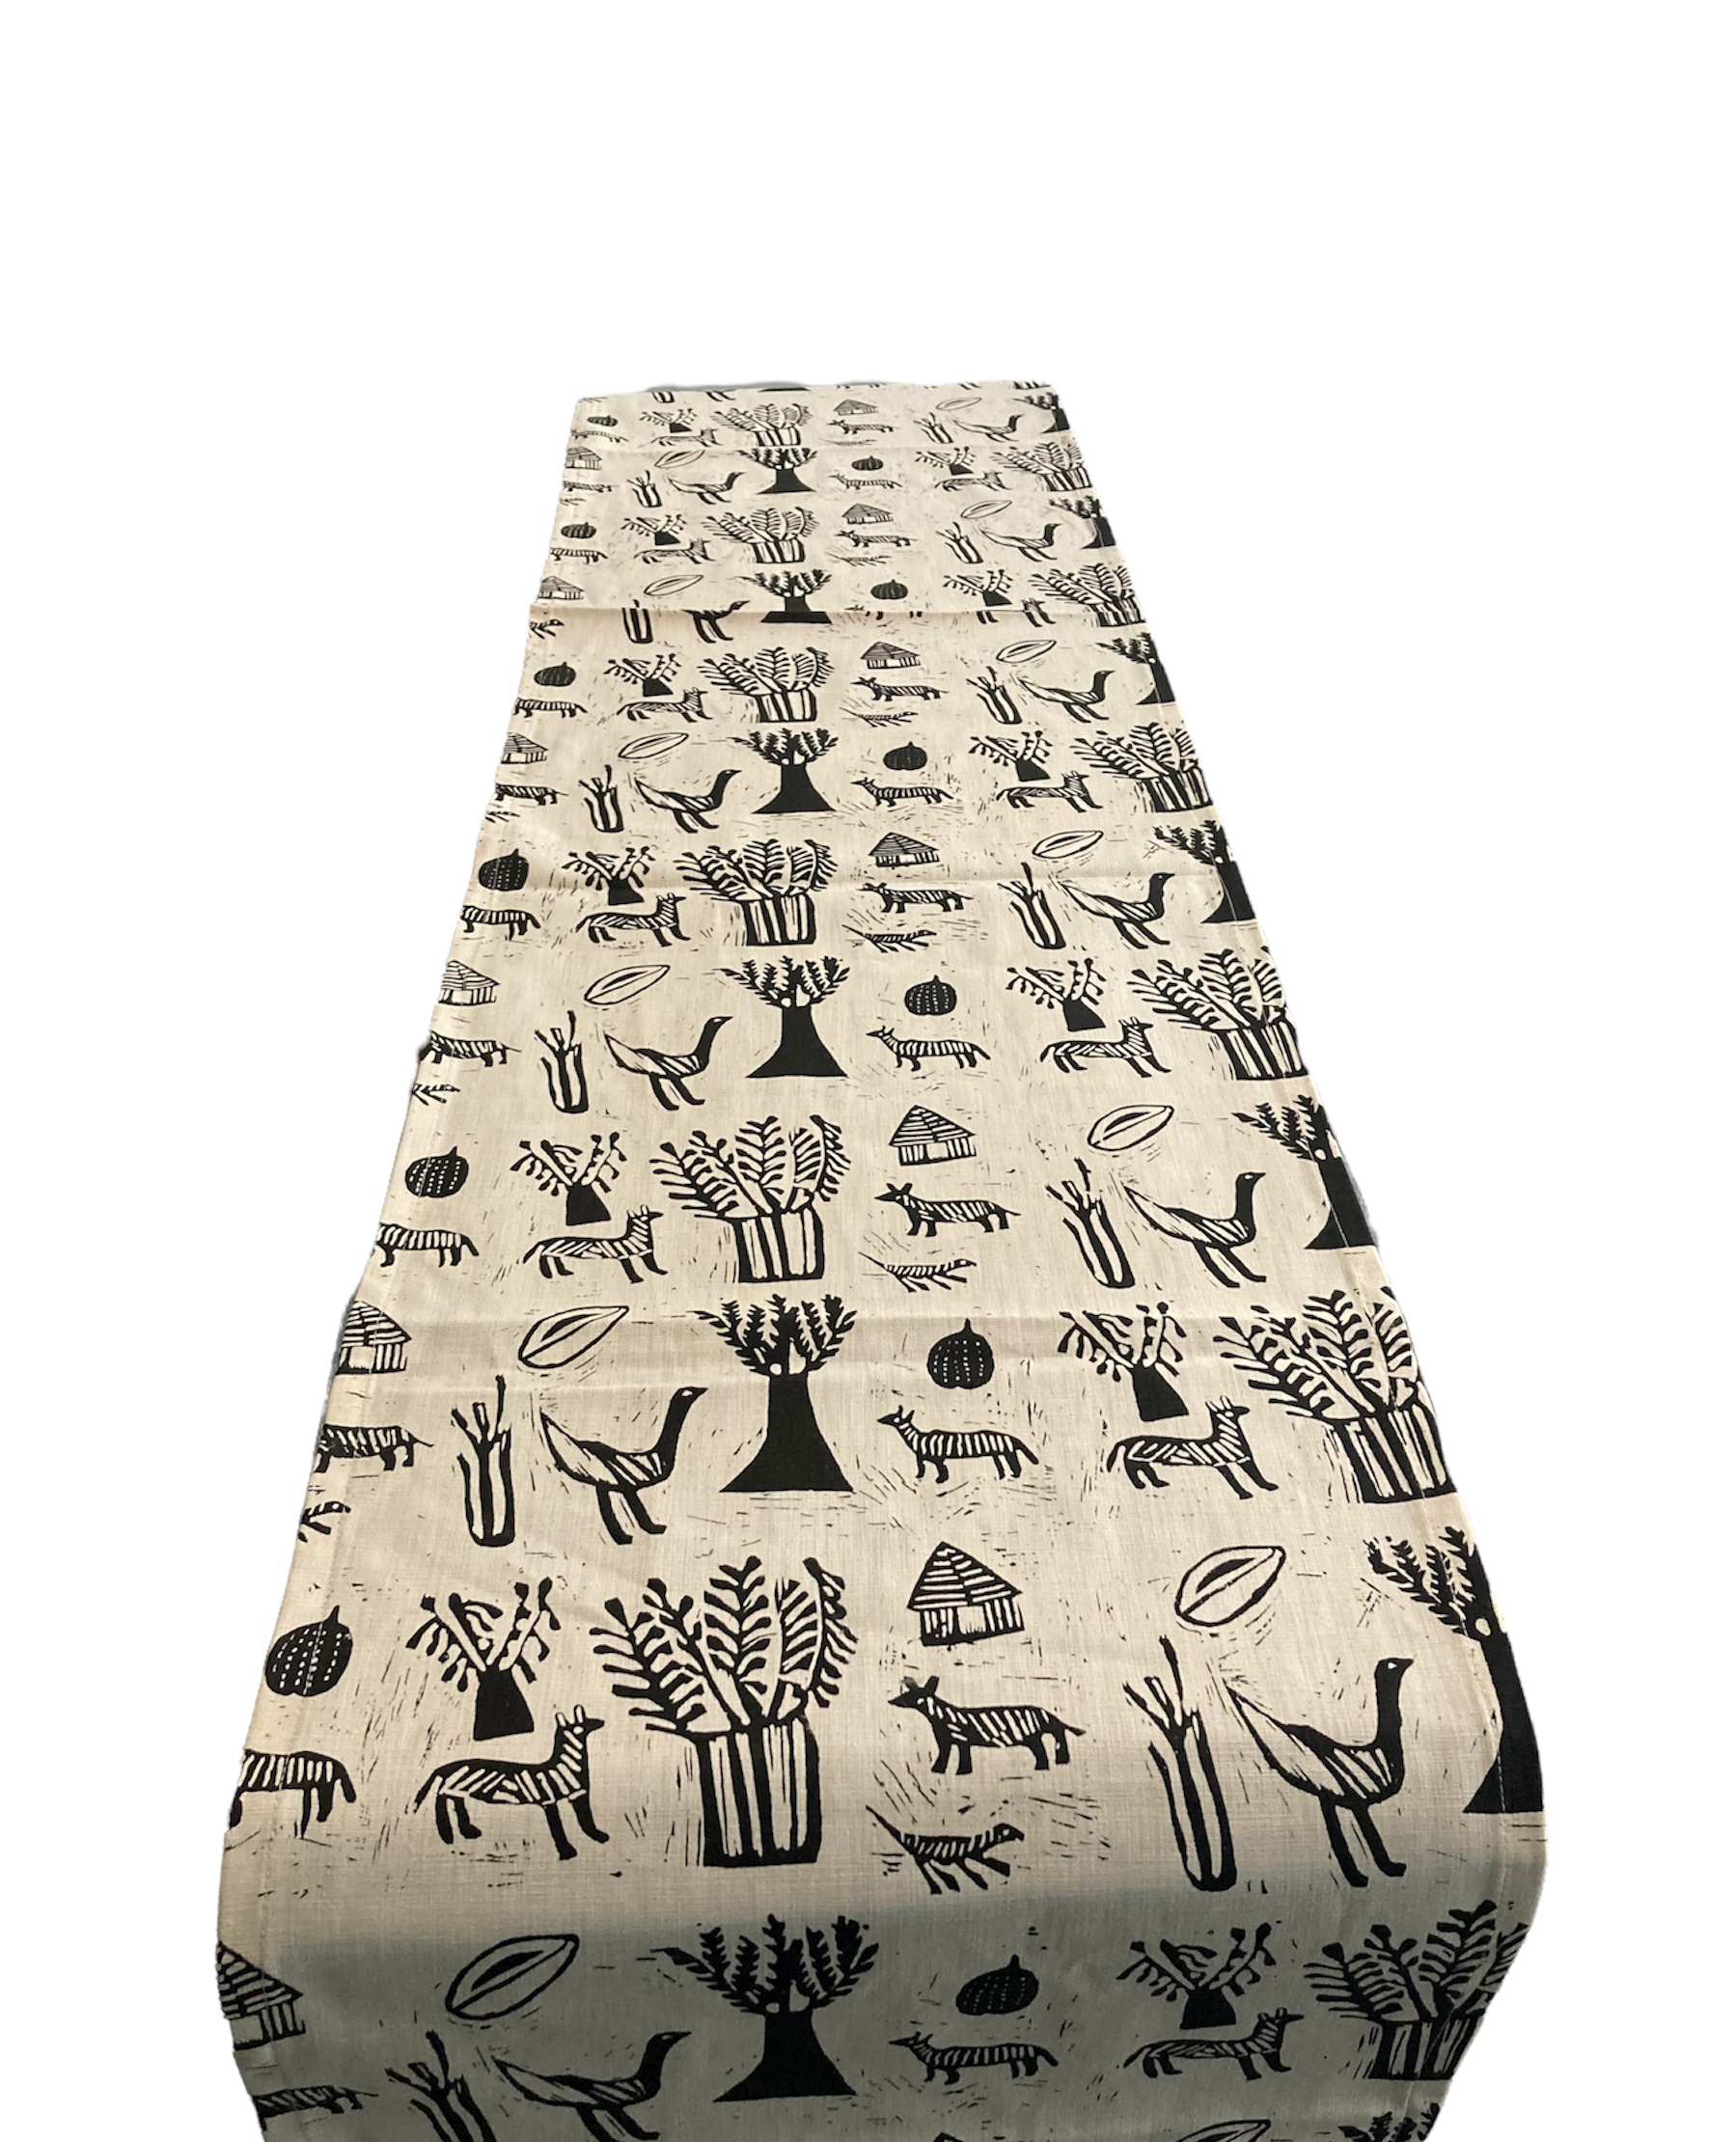 100% cotton Table Runner 96" x 16" from Namibia - Design bw06l